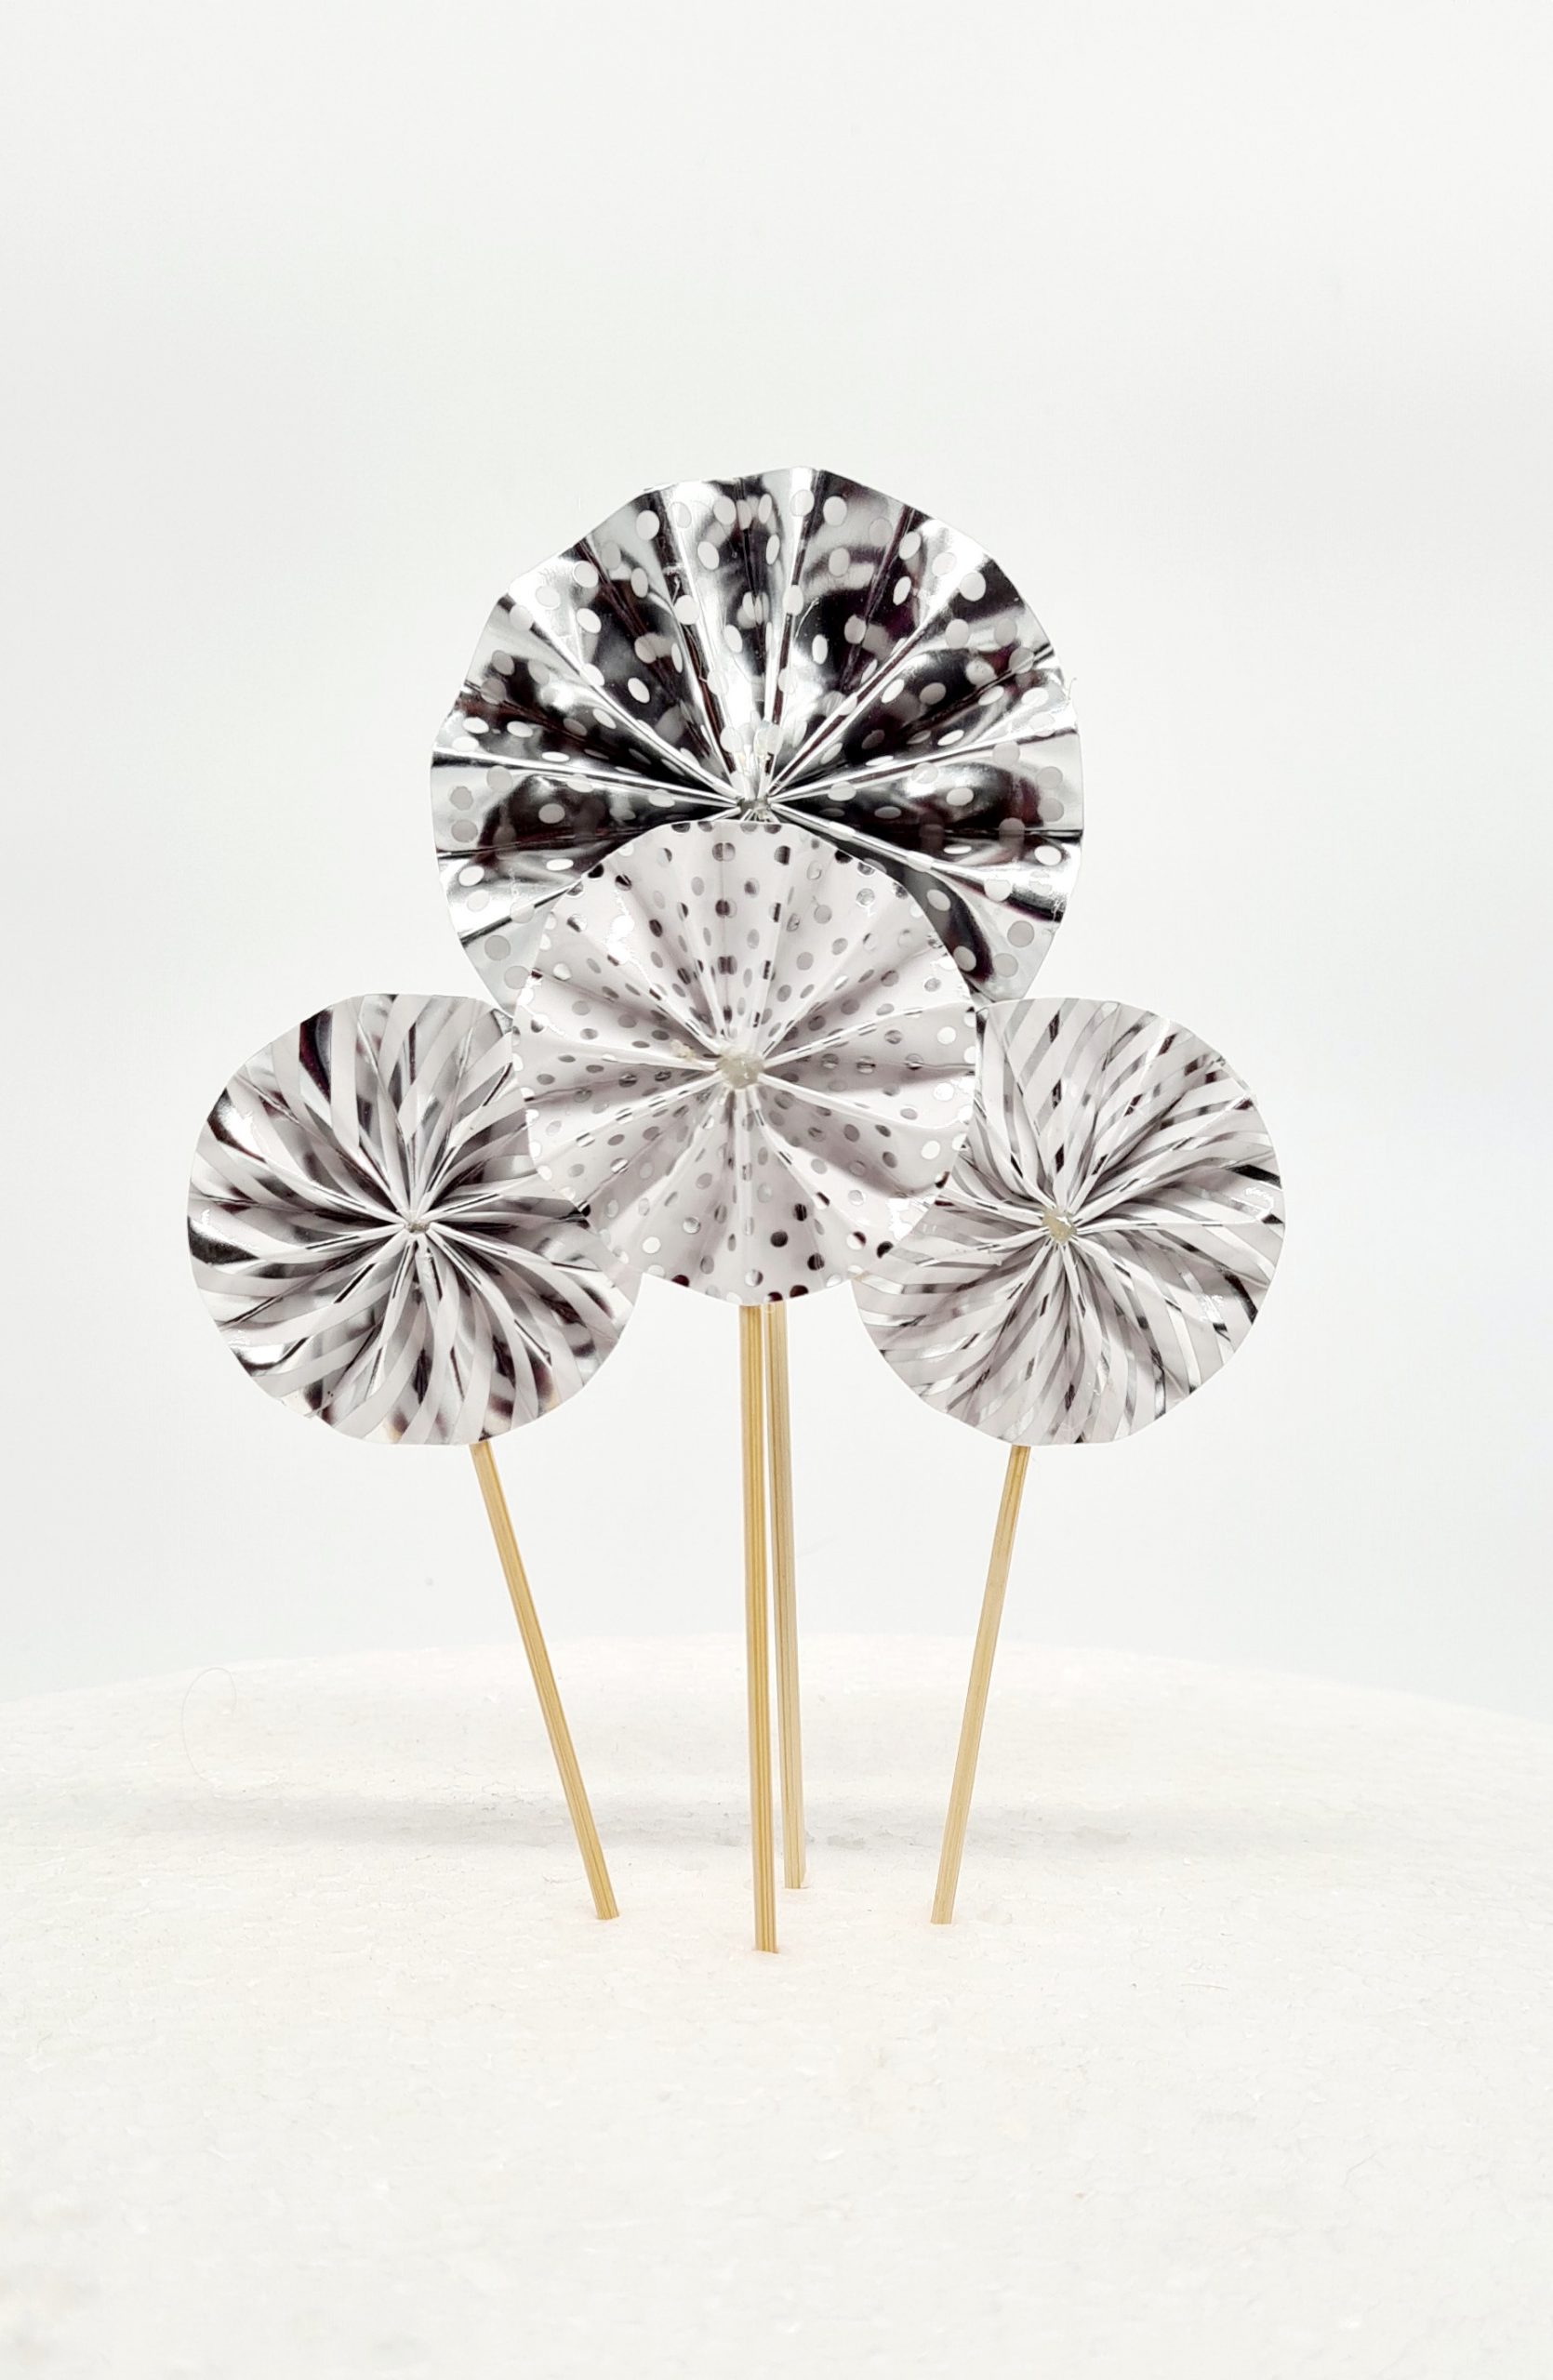 CAKE TOPPERS MOLINILLOS PLATA